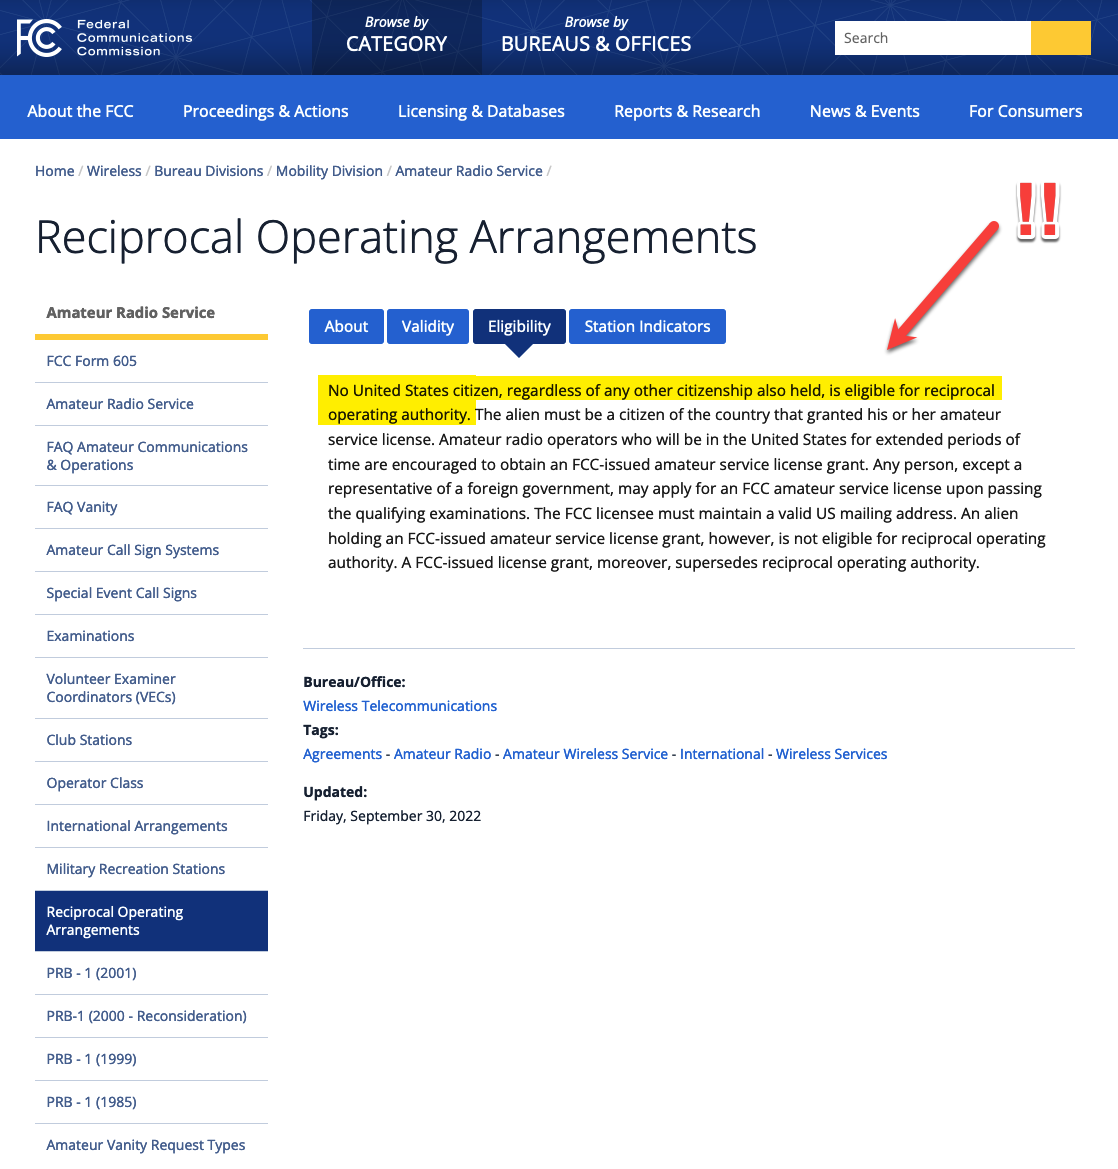 Reciprocal Operating Arrangements as shown on the FCC Web Site